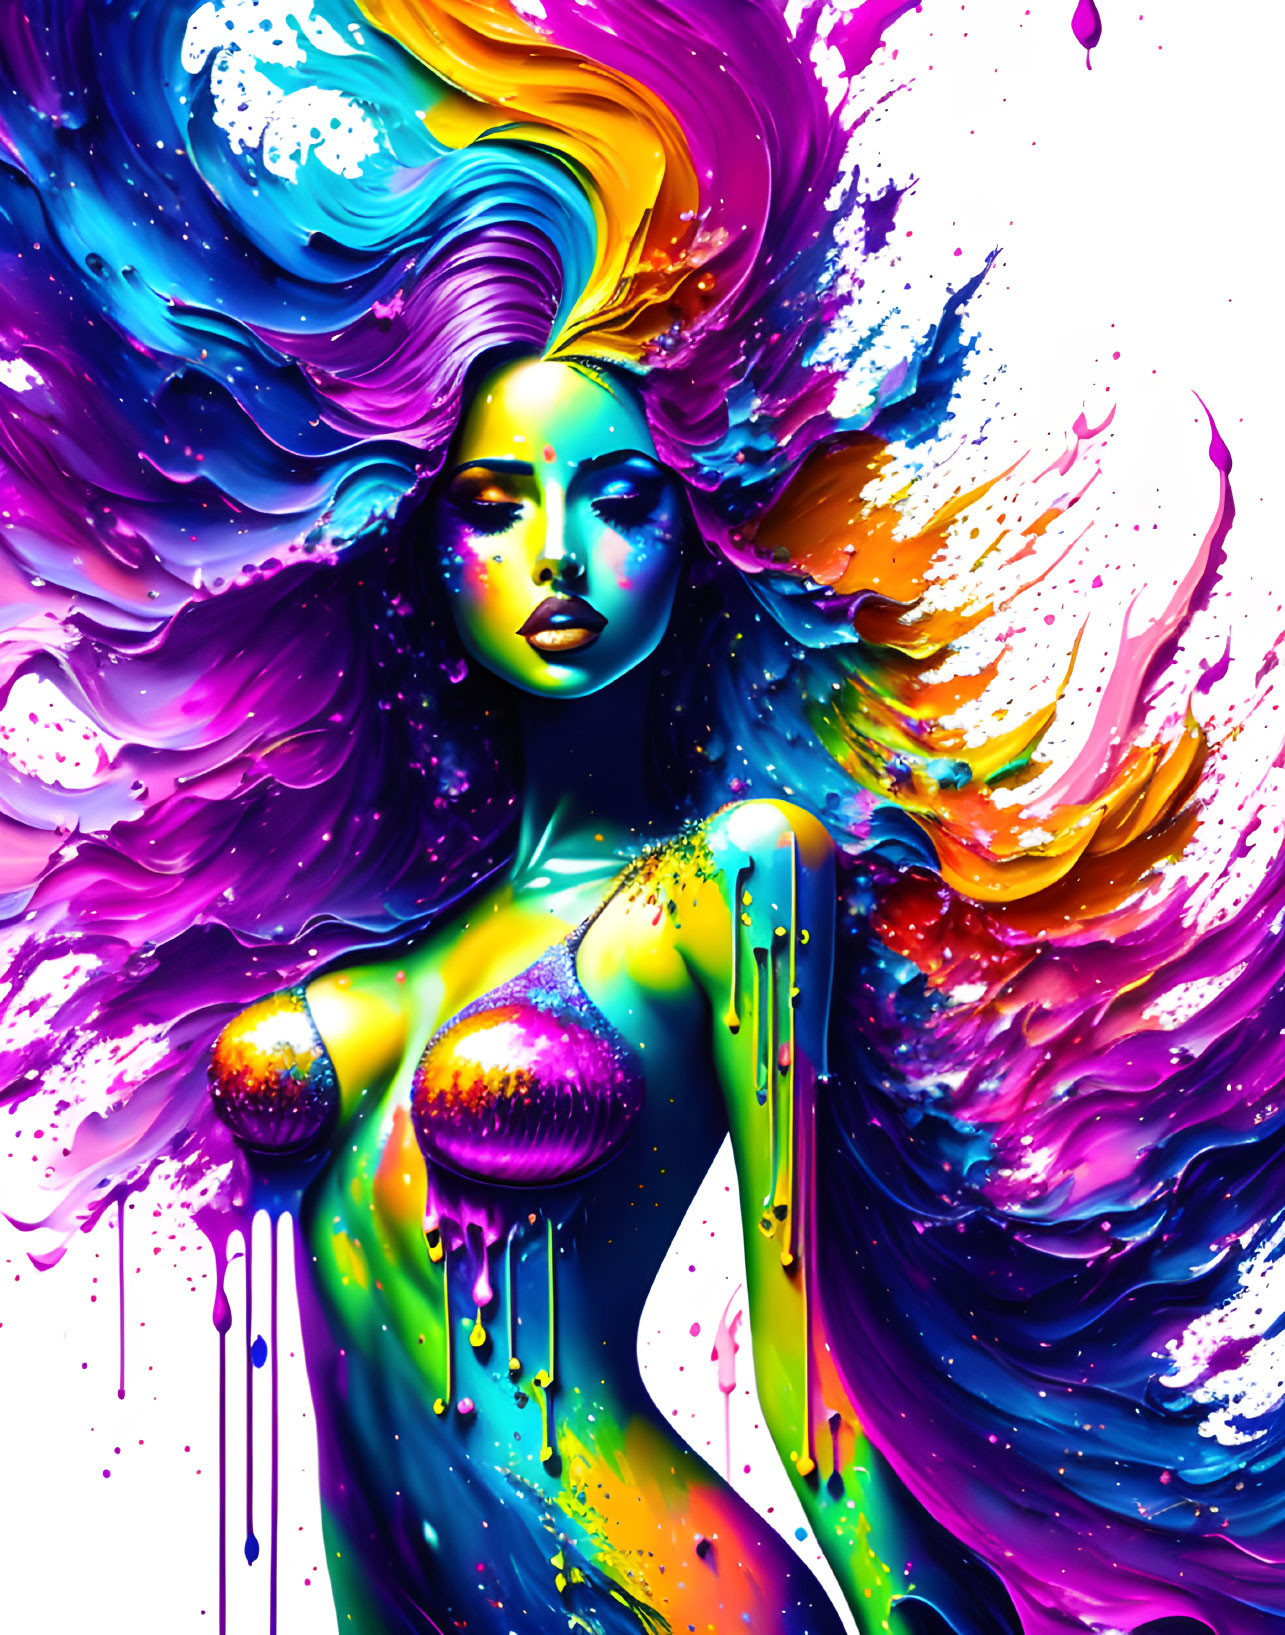 Colorful digital artwork: Woman with flowing hair and paint drips on white background